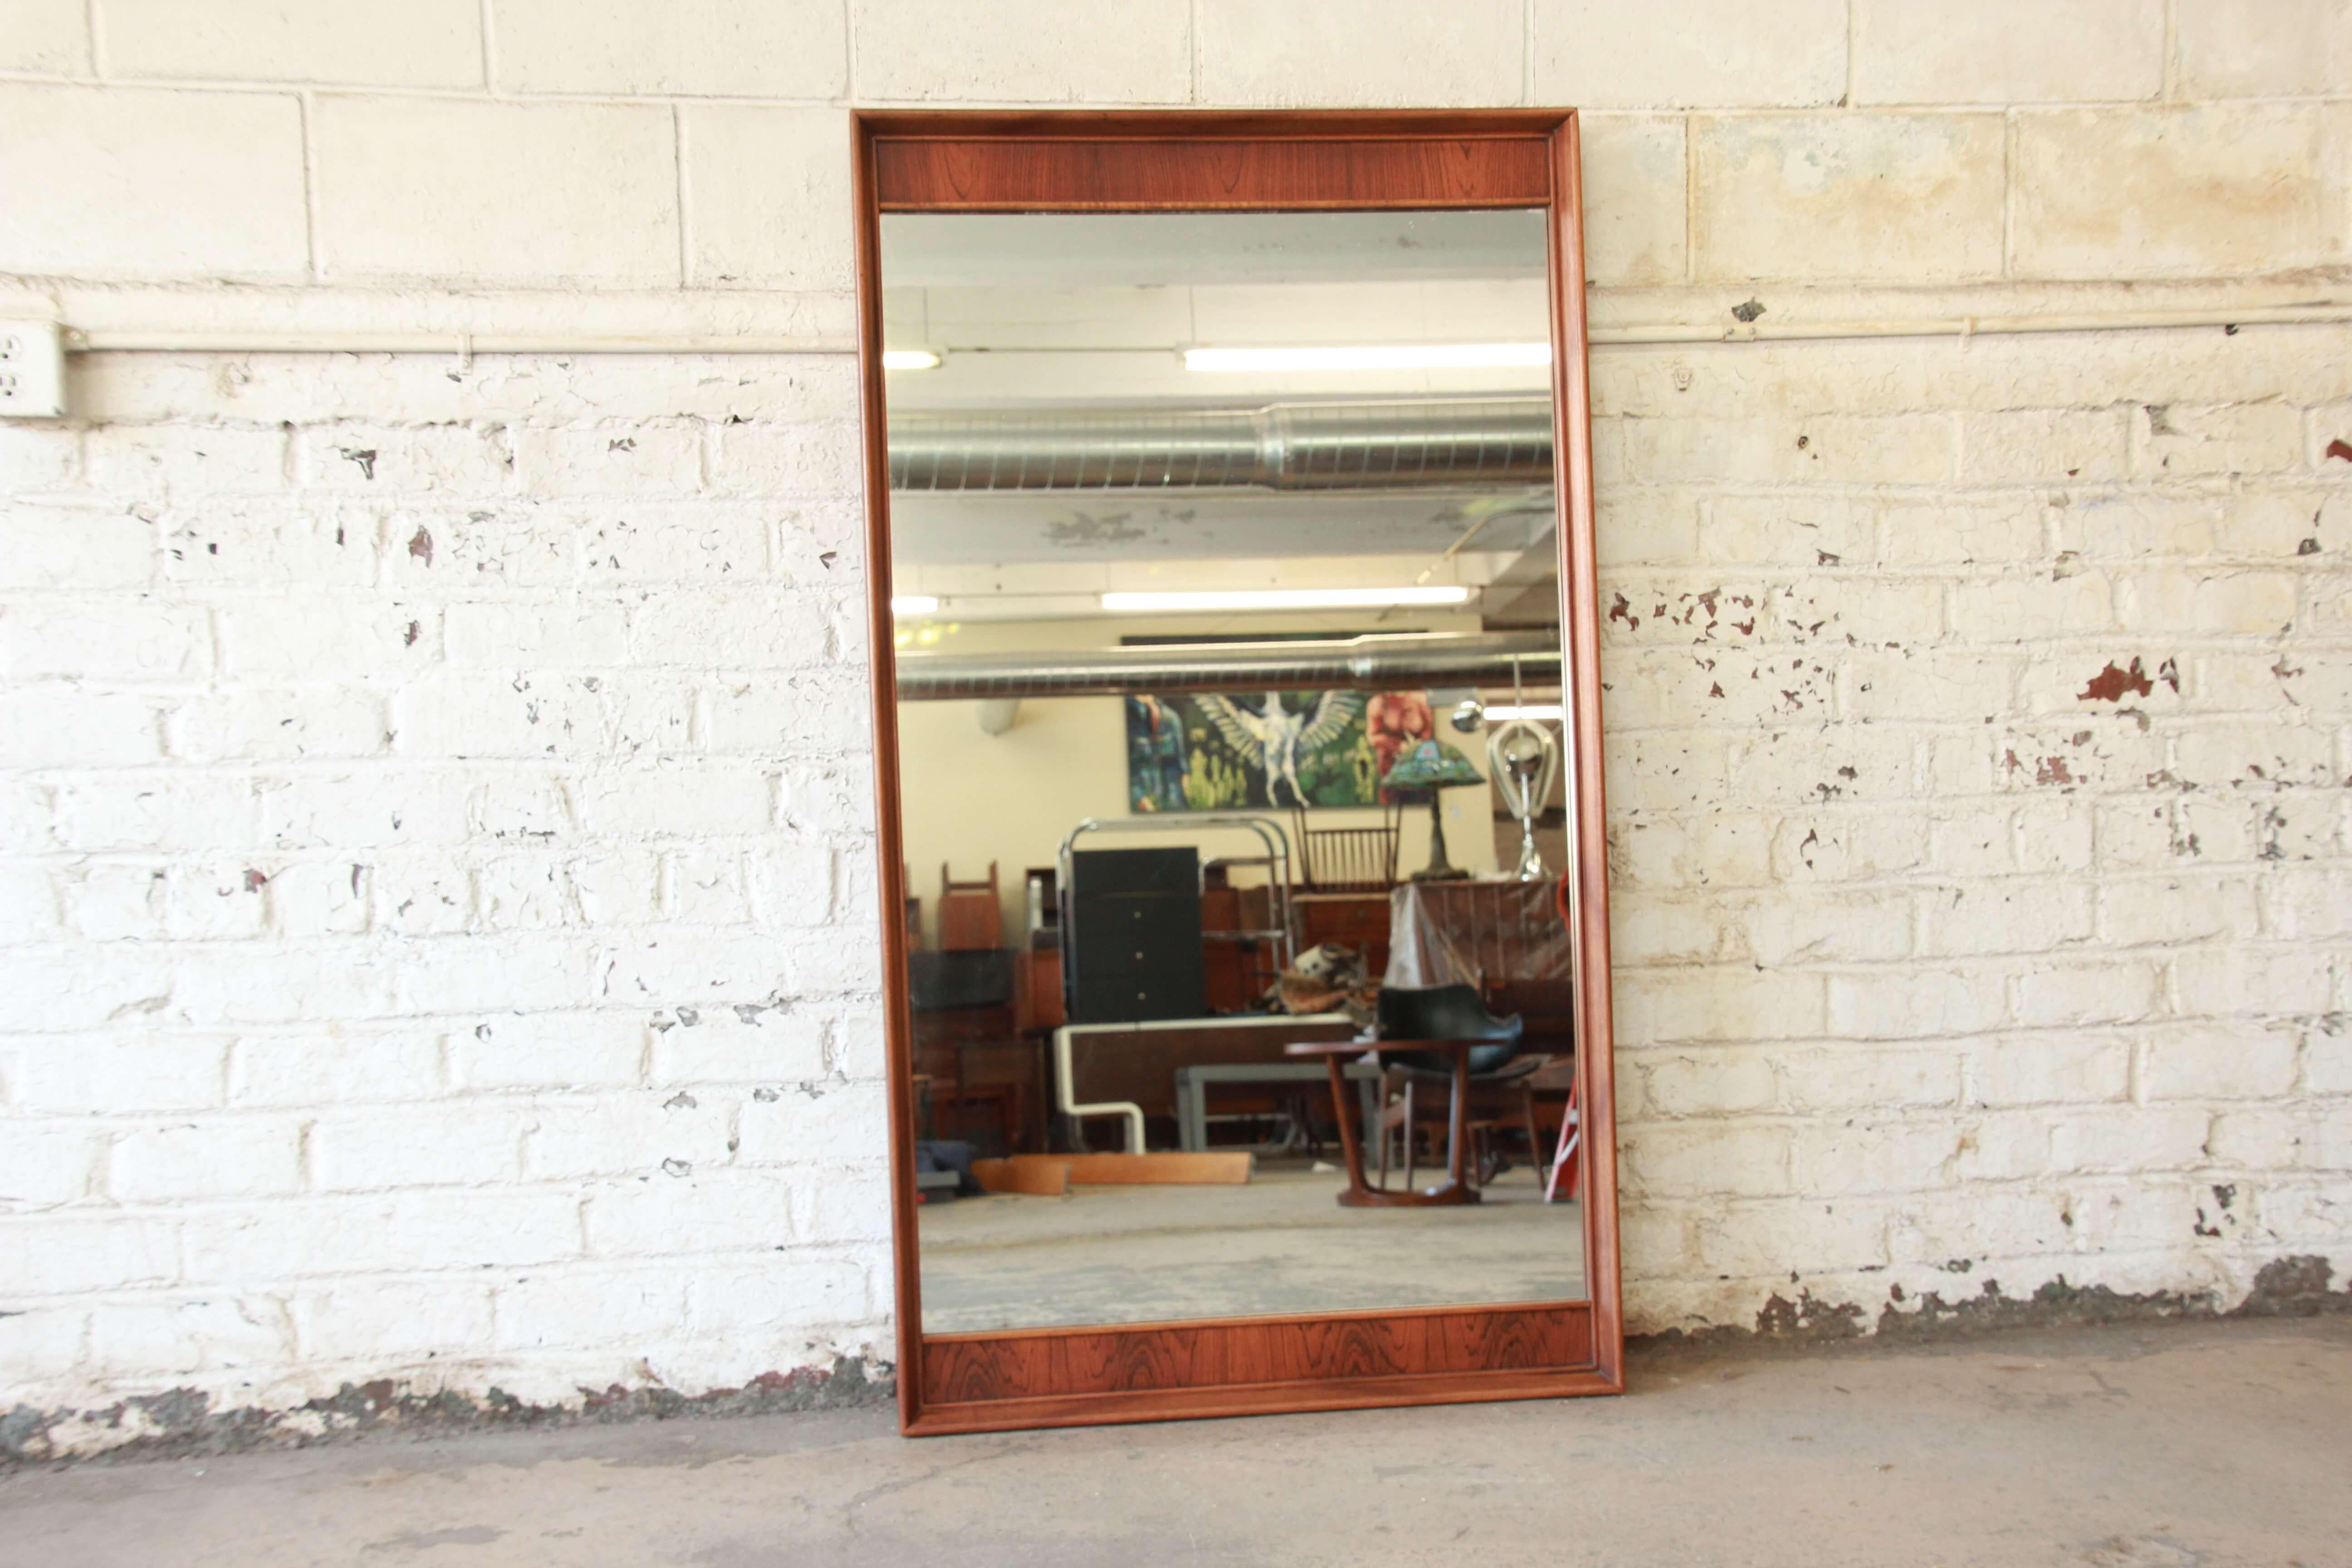 Offering a very nice walnut and rosewood Kent Coffey Perspecta wall mirror. The mirror has an ice solid walnut frame with rosewood details on the inside edge of the mirror. The mirror is in great vintage condition and would fit nicely in any